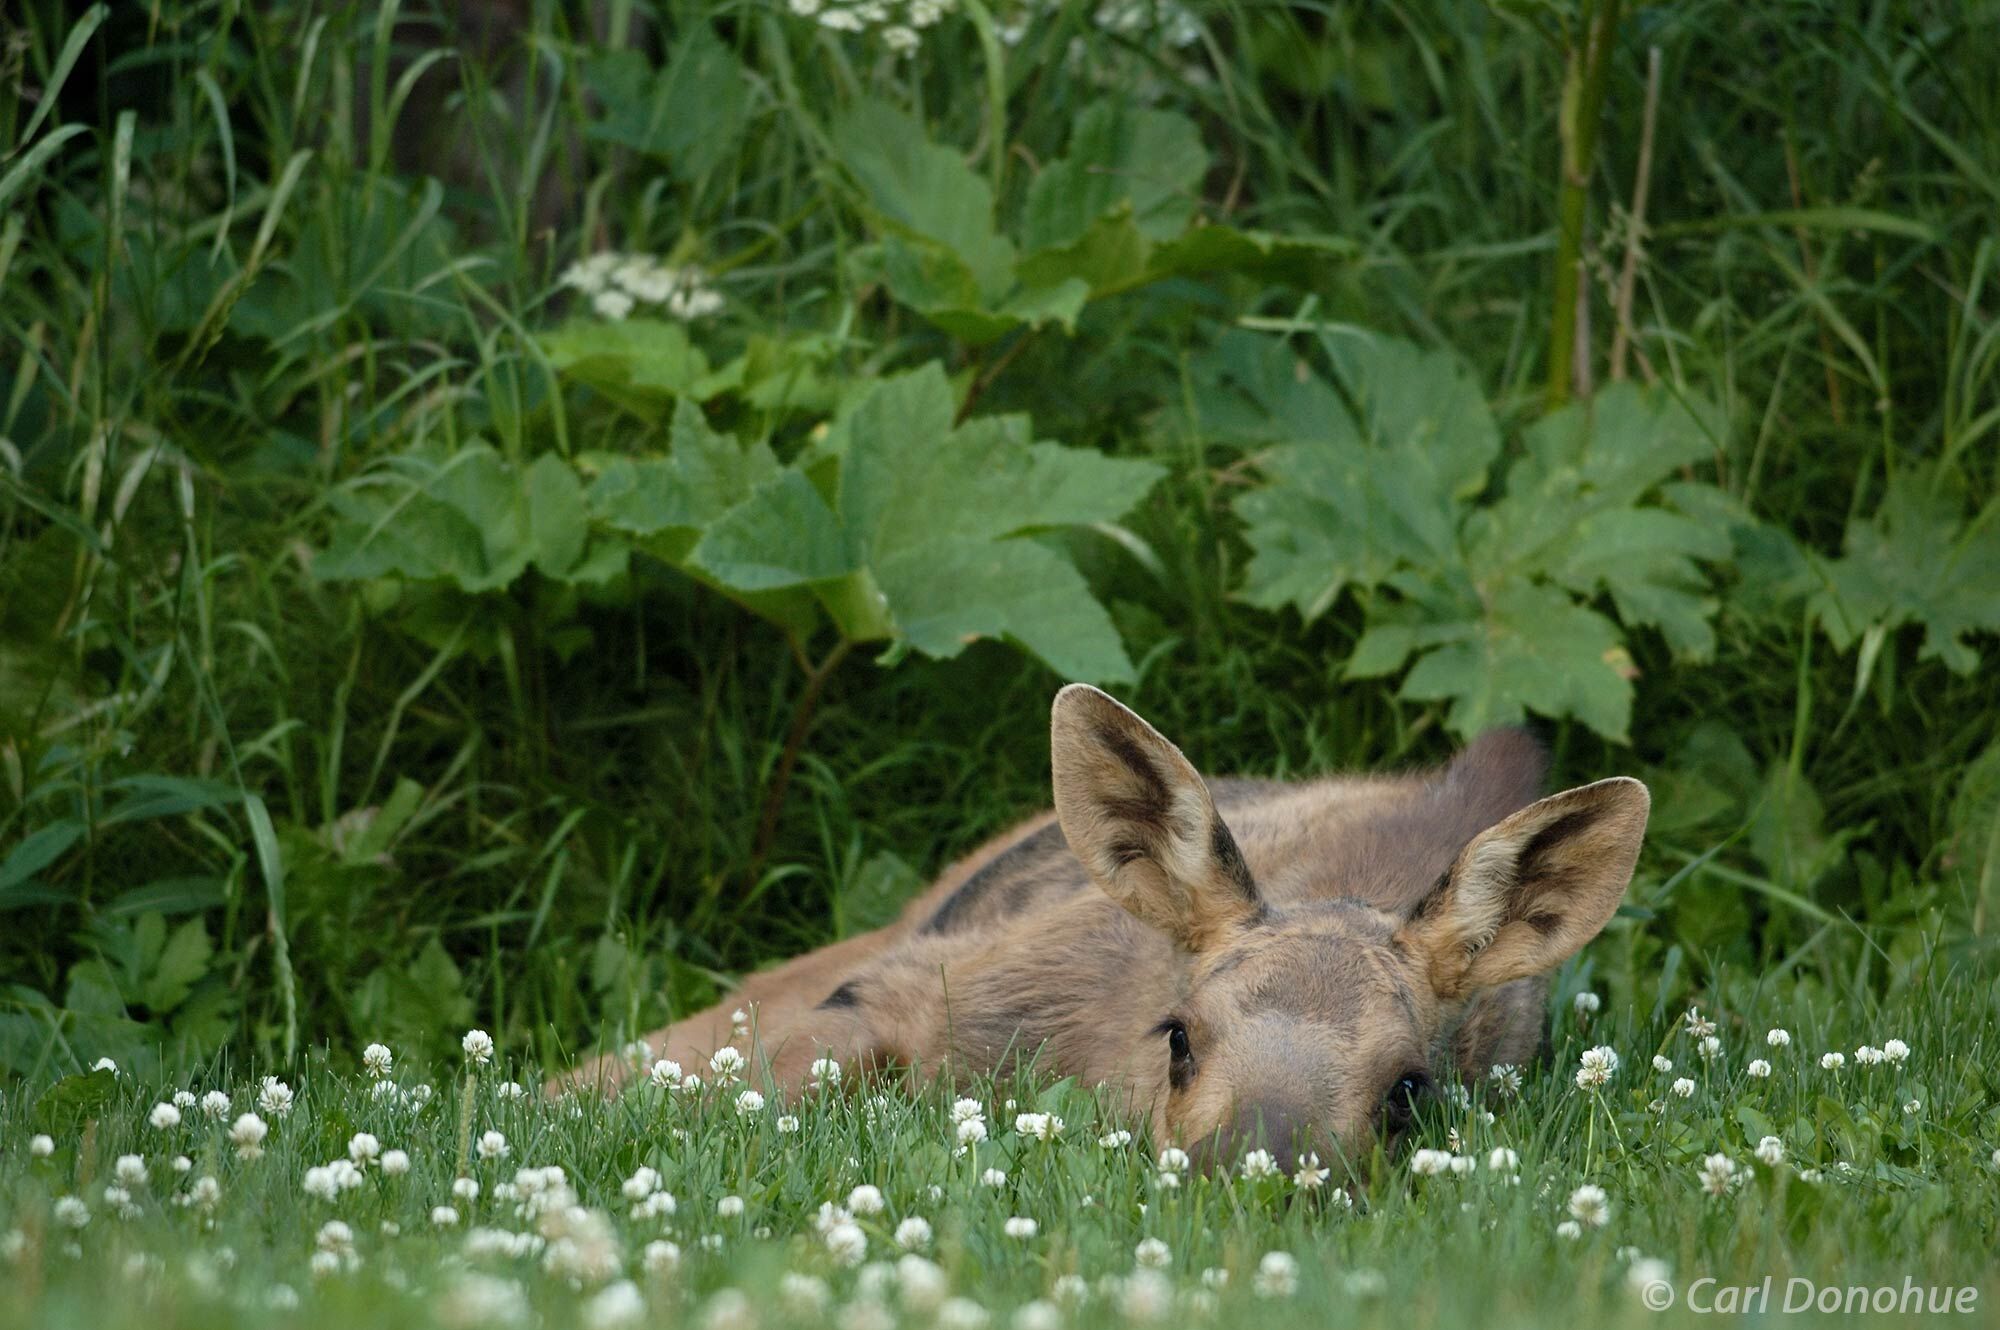 A moose calf lying in the grass near the forest edge in the city of Anchorage, Alaska. The moose calf is a reminder of the unspoiled...